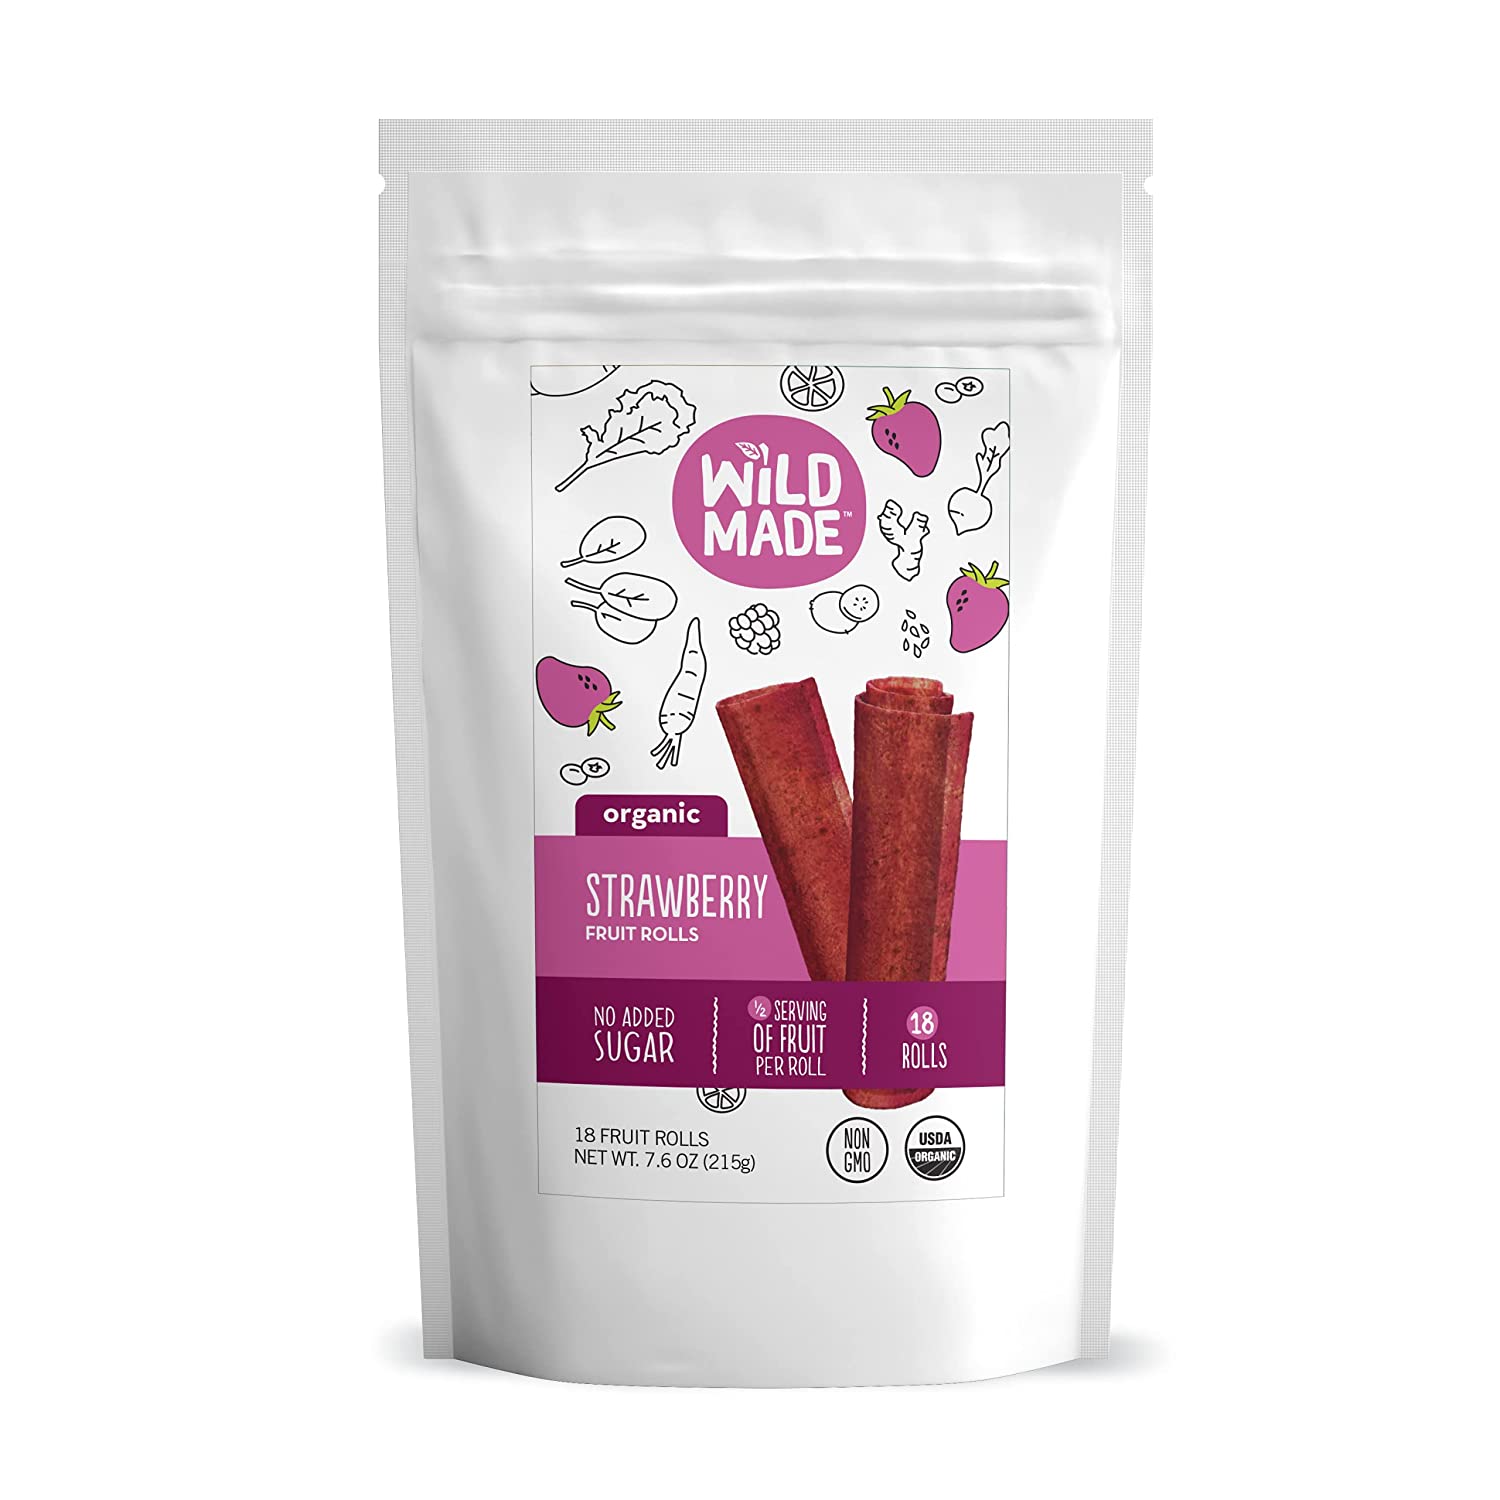 Fruit Rolls - Organic Fruit Snacks with No Added Sugar for Kids and Adults - Gluten-Free, Non-GMO, Vegan (Strawberry)